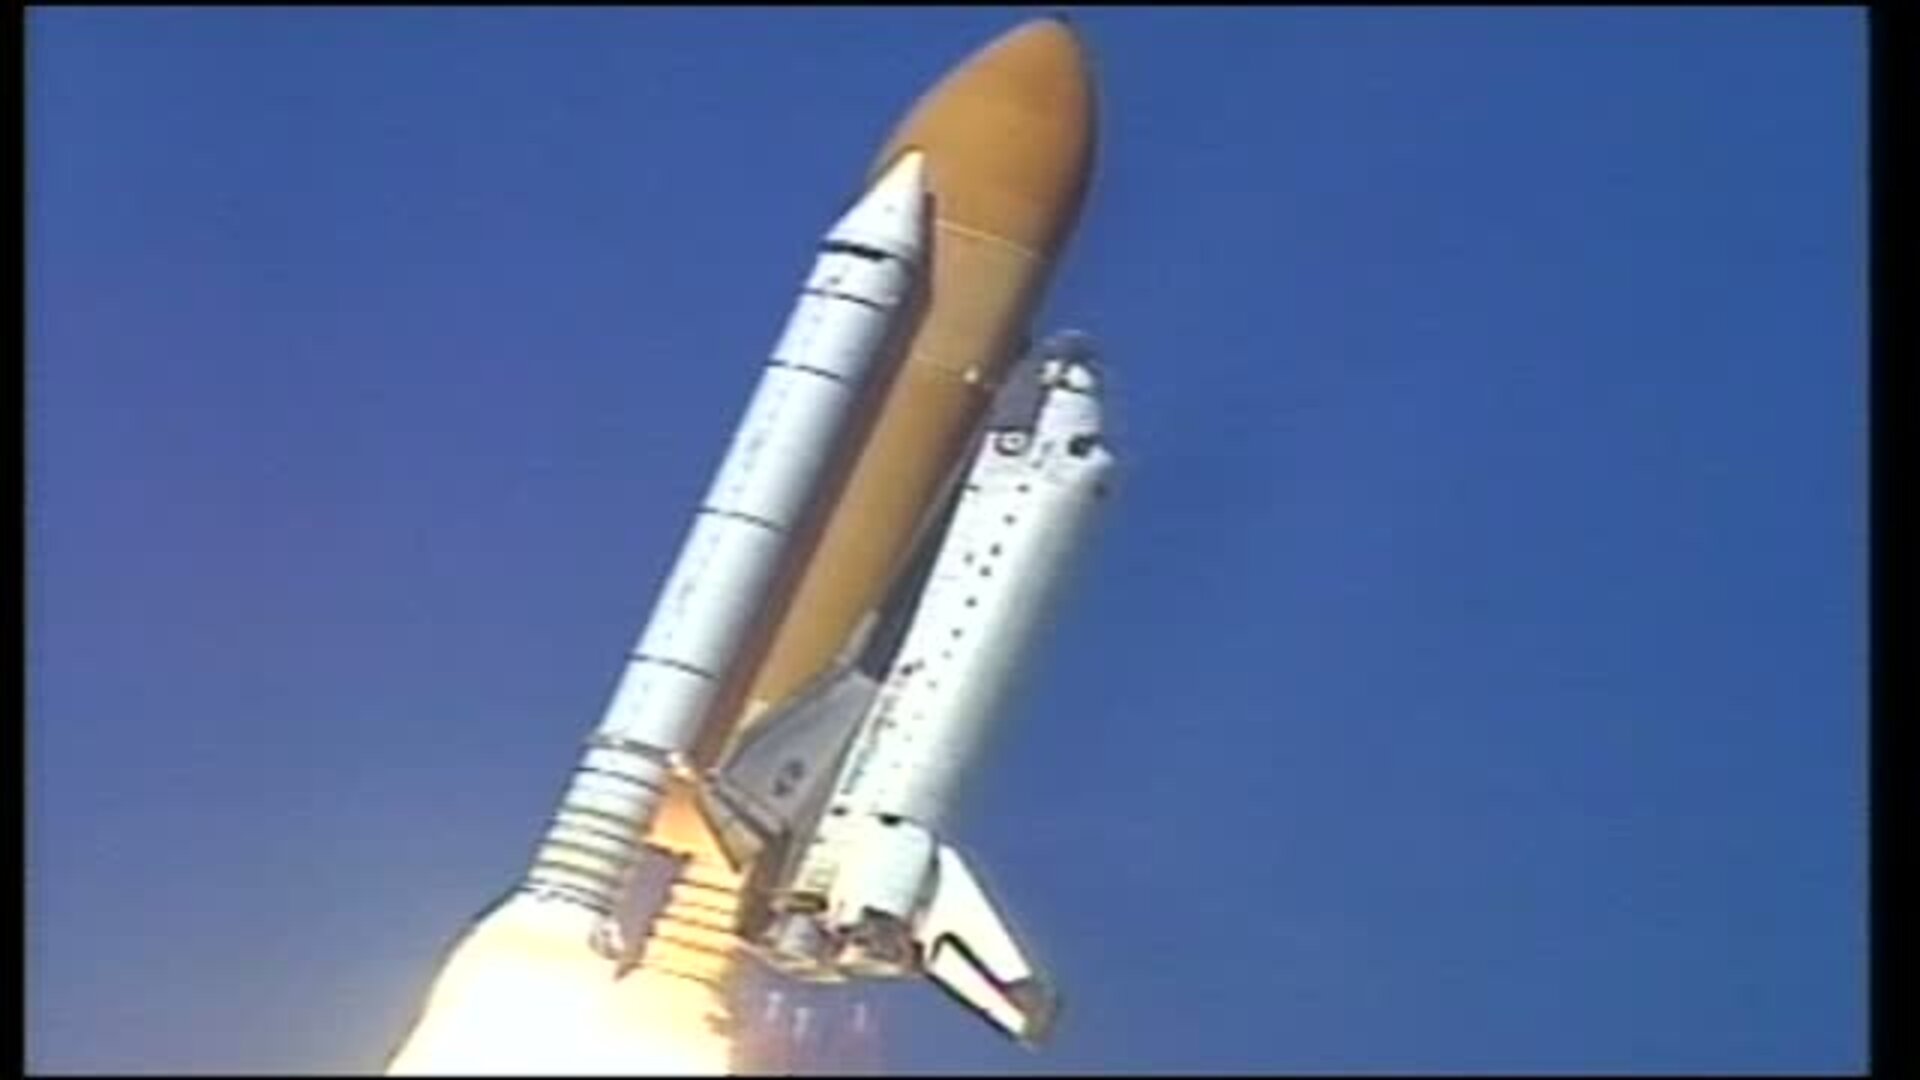 A Tribute to STS-107